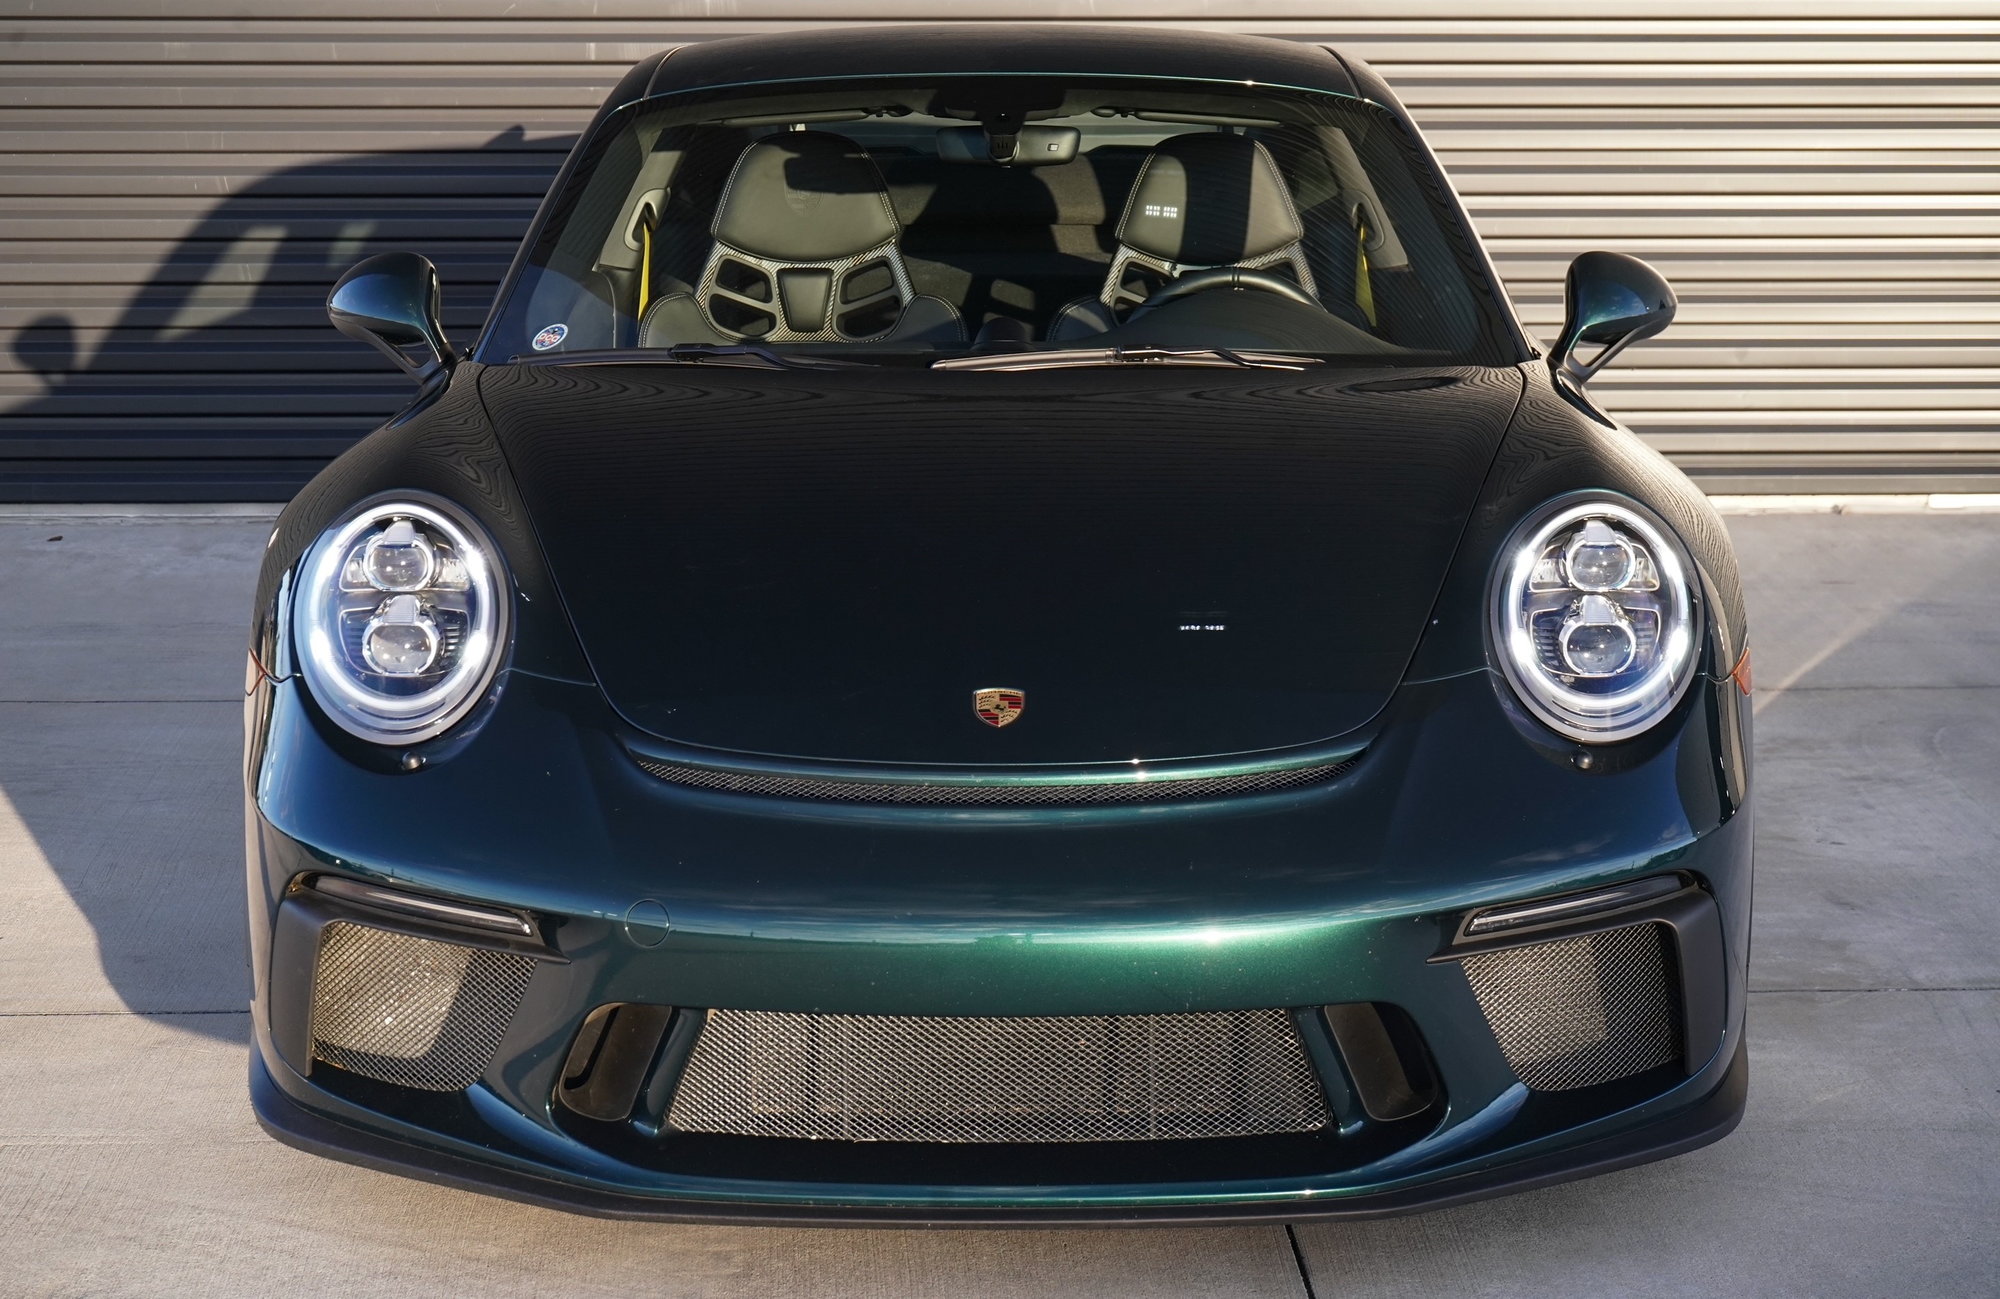 2018 Porsche GT3 - PTS Jet Green Metallic 2018 GT3 MT - Used - VIN WP0AC2A91JS176145 - 6,790 Miles - 6 cyl - 2WD - Manual - Coupe - Houston, TX 77090, United States